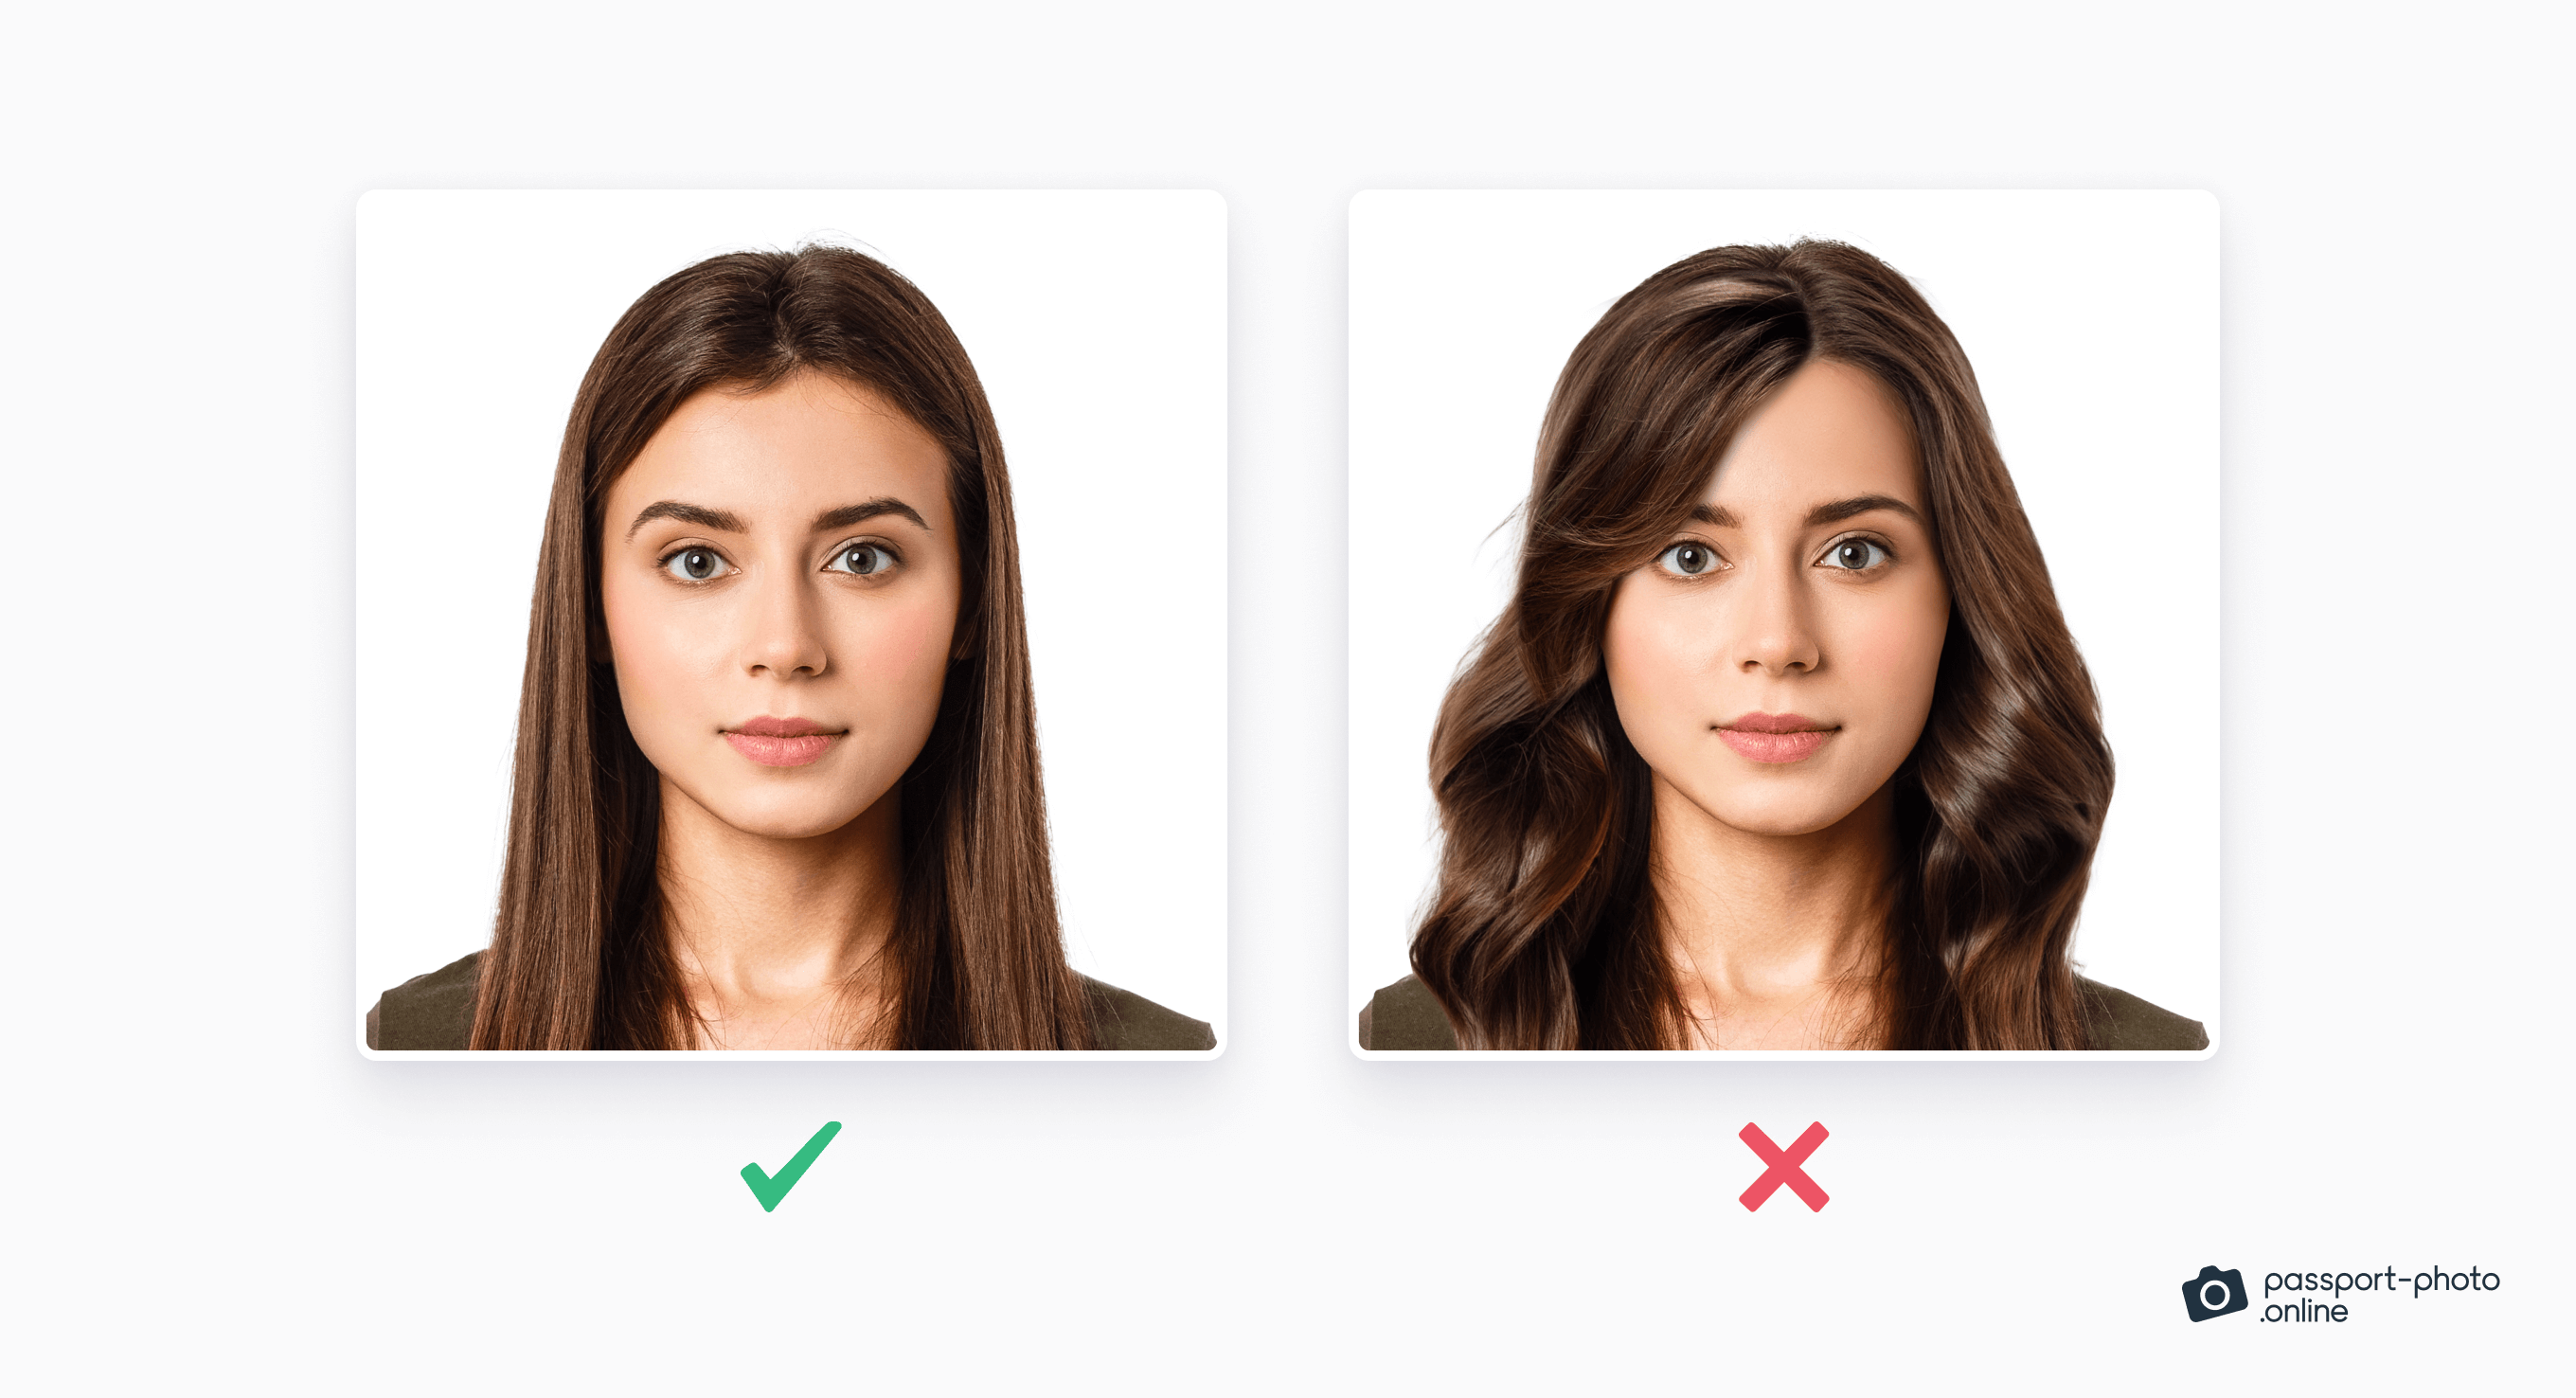 Examples of acceptable and unacceptable hair-down hairstyles for a passport photo.